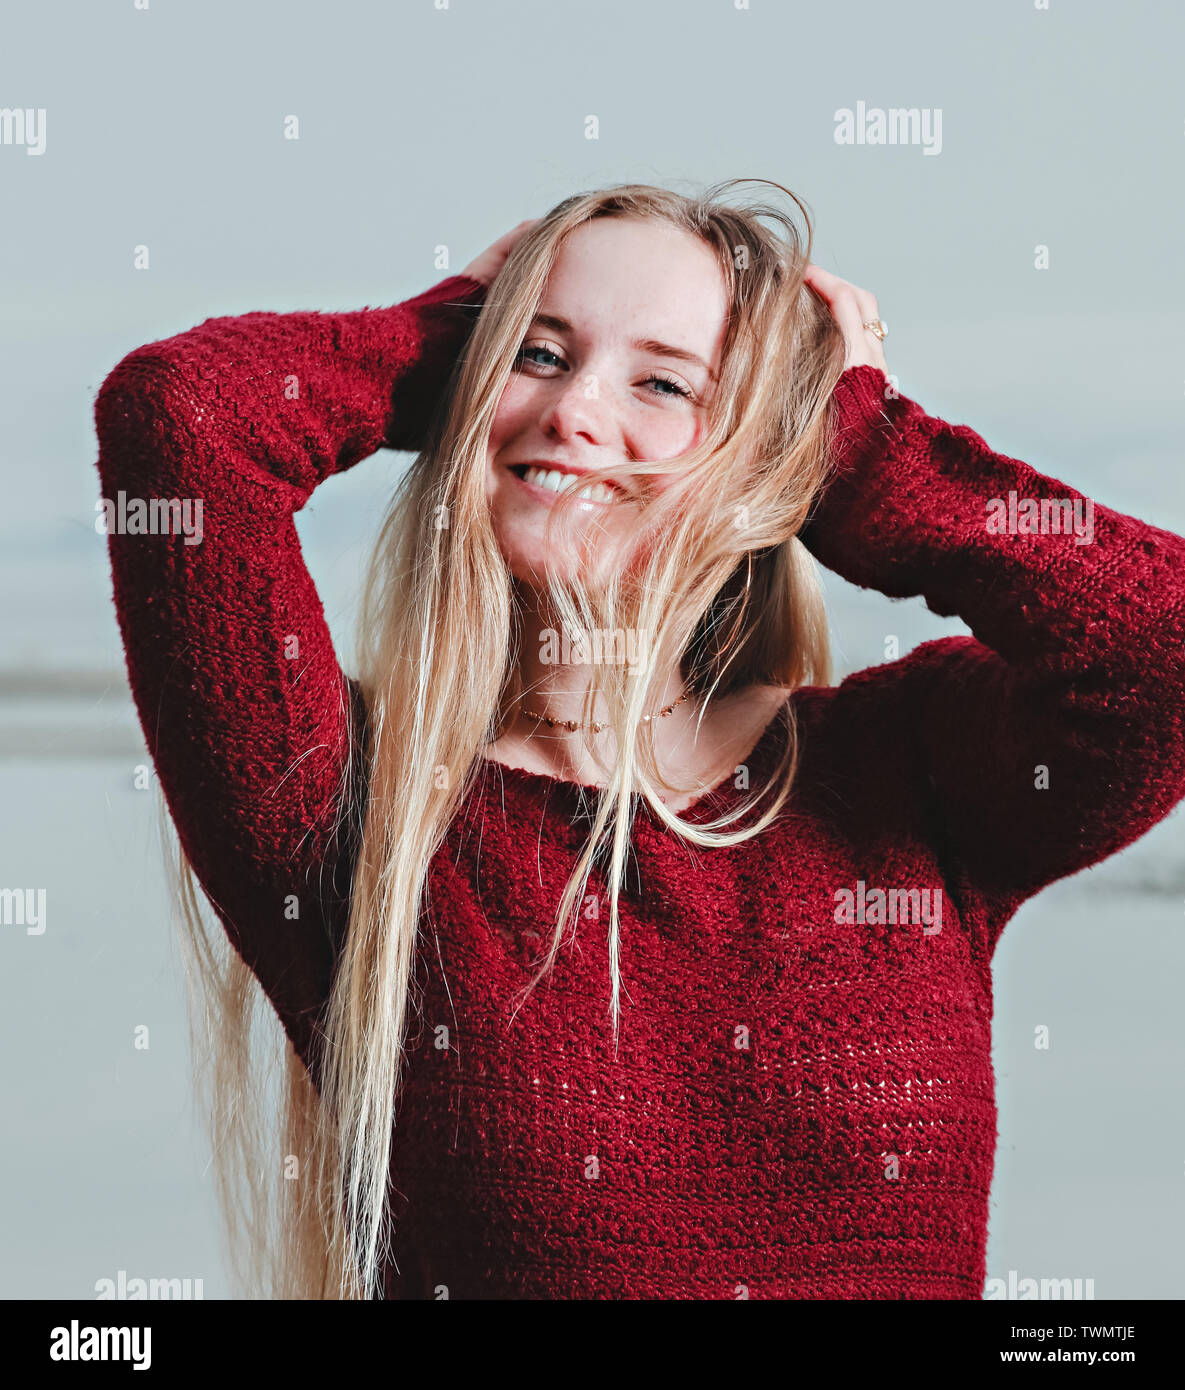 A young woman in a red shirt puts her hands through her long blond hair. Stock Photo